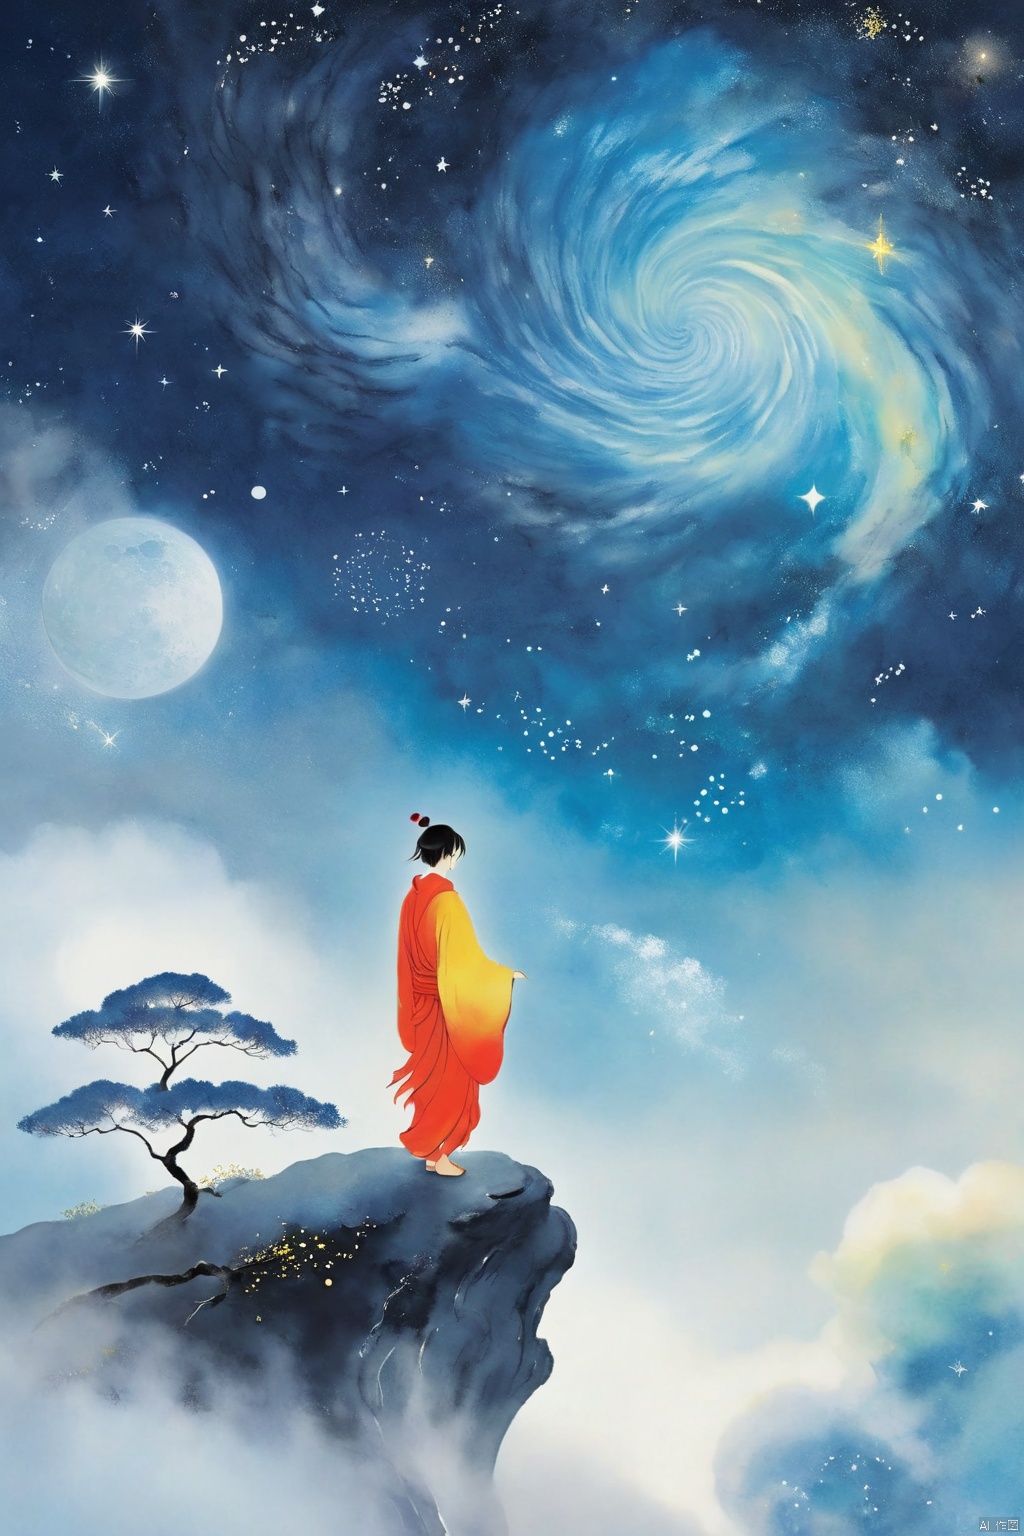  Tie dyeing style, Tie dyeing,Shinkai Makoto style, a whimsical digital illustration of a solitary figure standing on a cliff overlooking the vast starry sky. The figure has a wistful expression, his hair blown by the wind and his robe flowing. The sky is filled with rotating galaxies and constellations, creating a fantastic atmosphere. Bright colors, ethereal lights